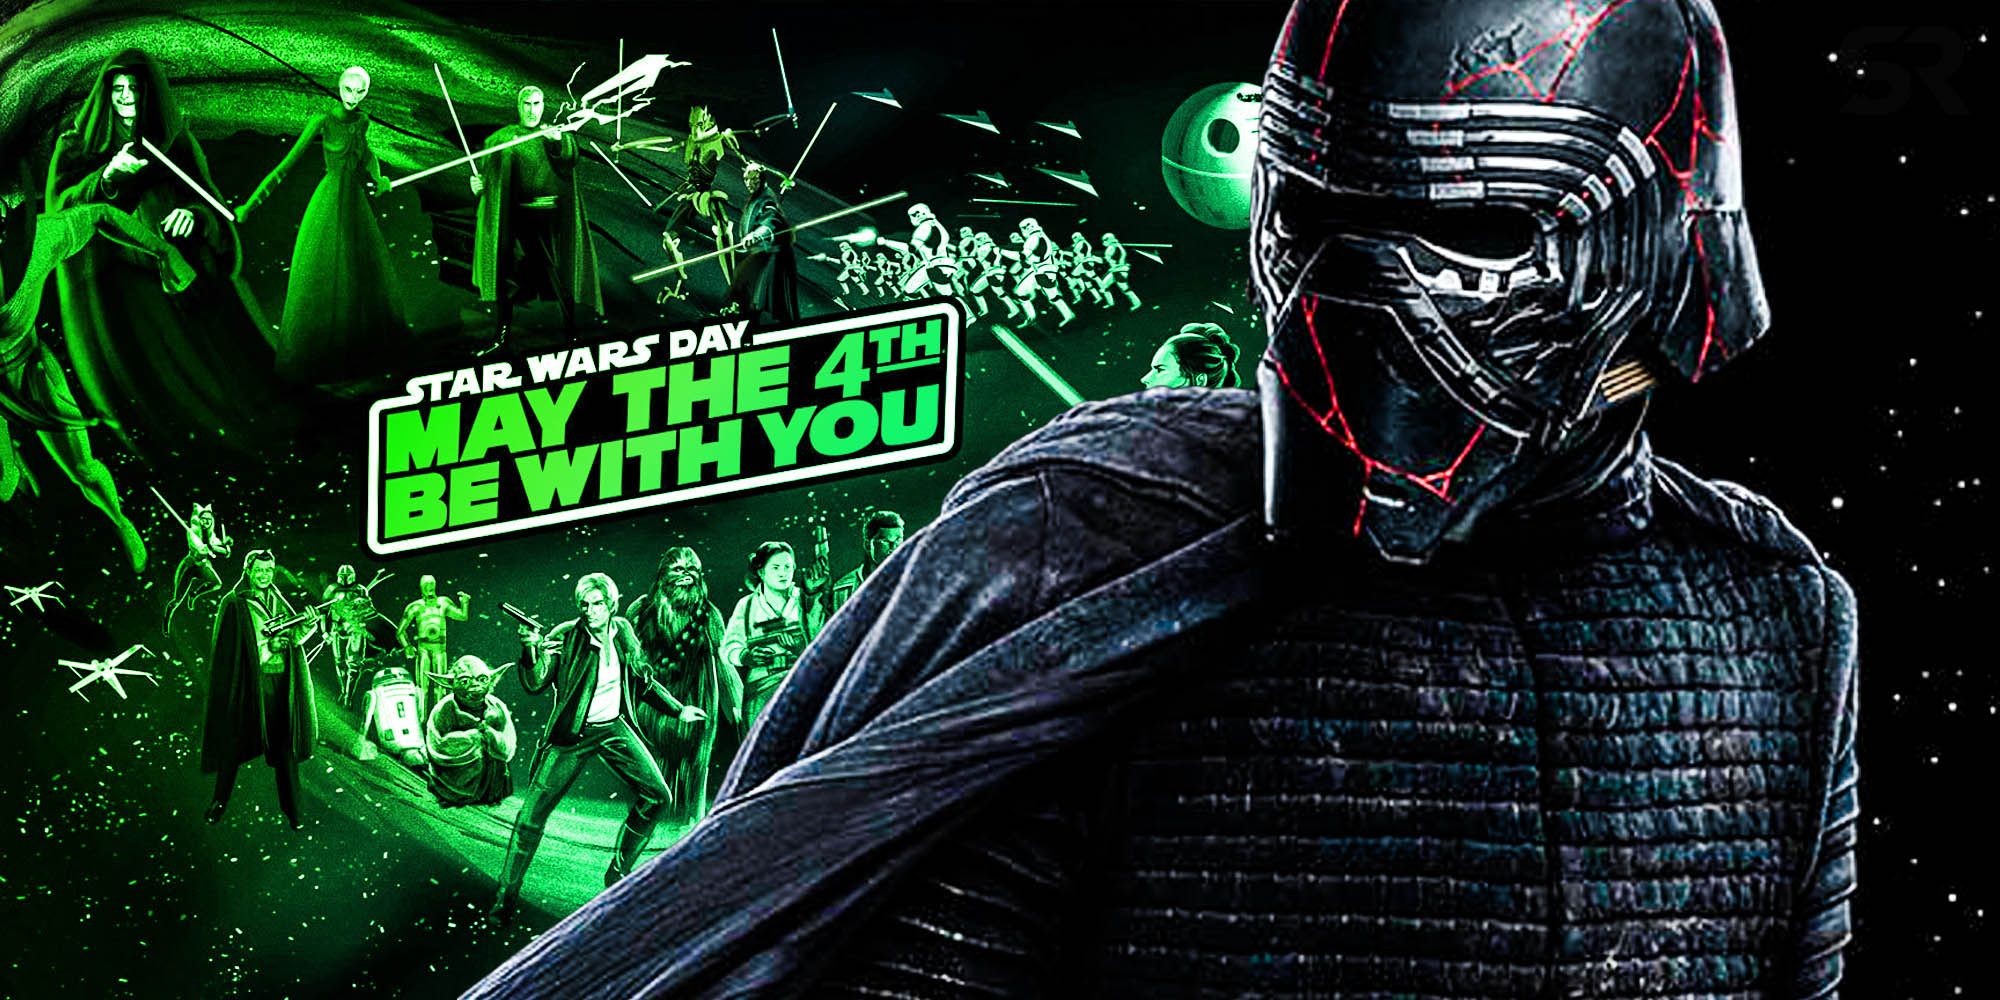 Kylo Ren Star wars day may the 4th be with you